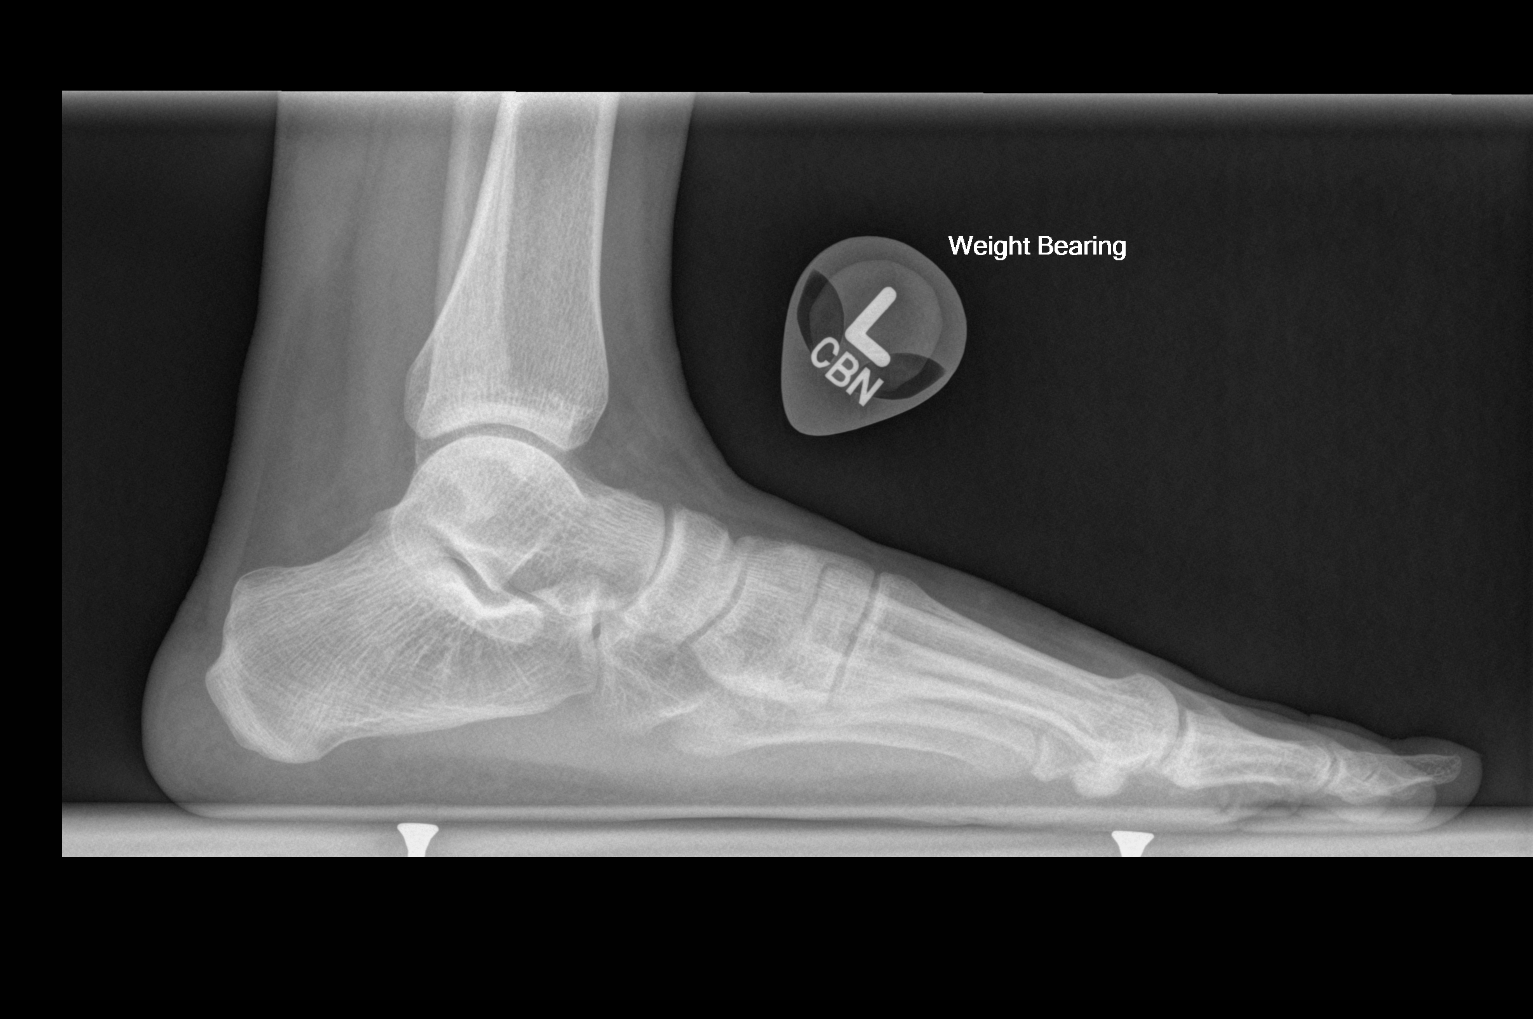 Single lateral radiograph of the left foot demonstrates pes planus as evidenced by a decreased calcaneal inclination angle.